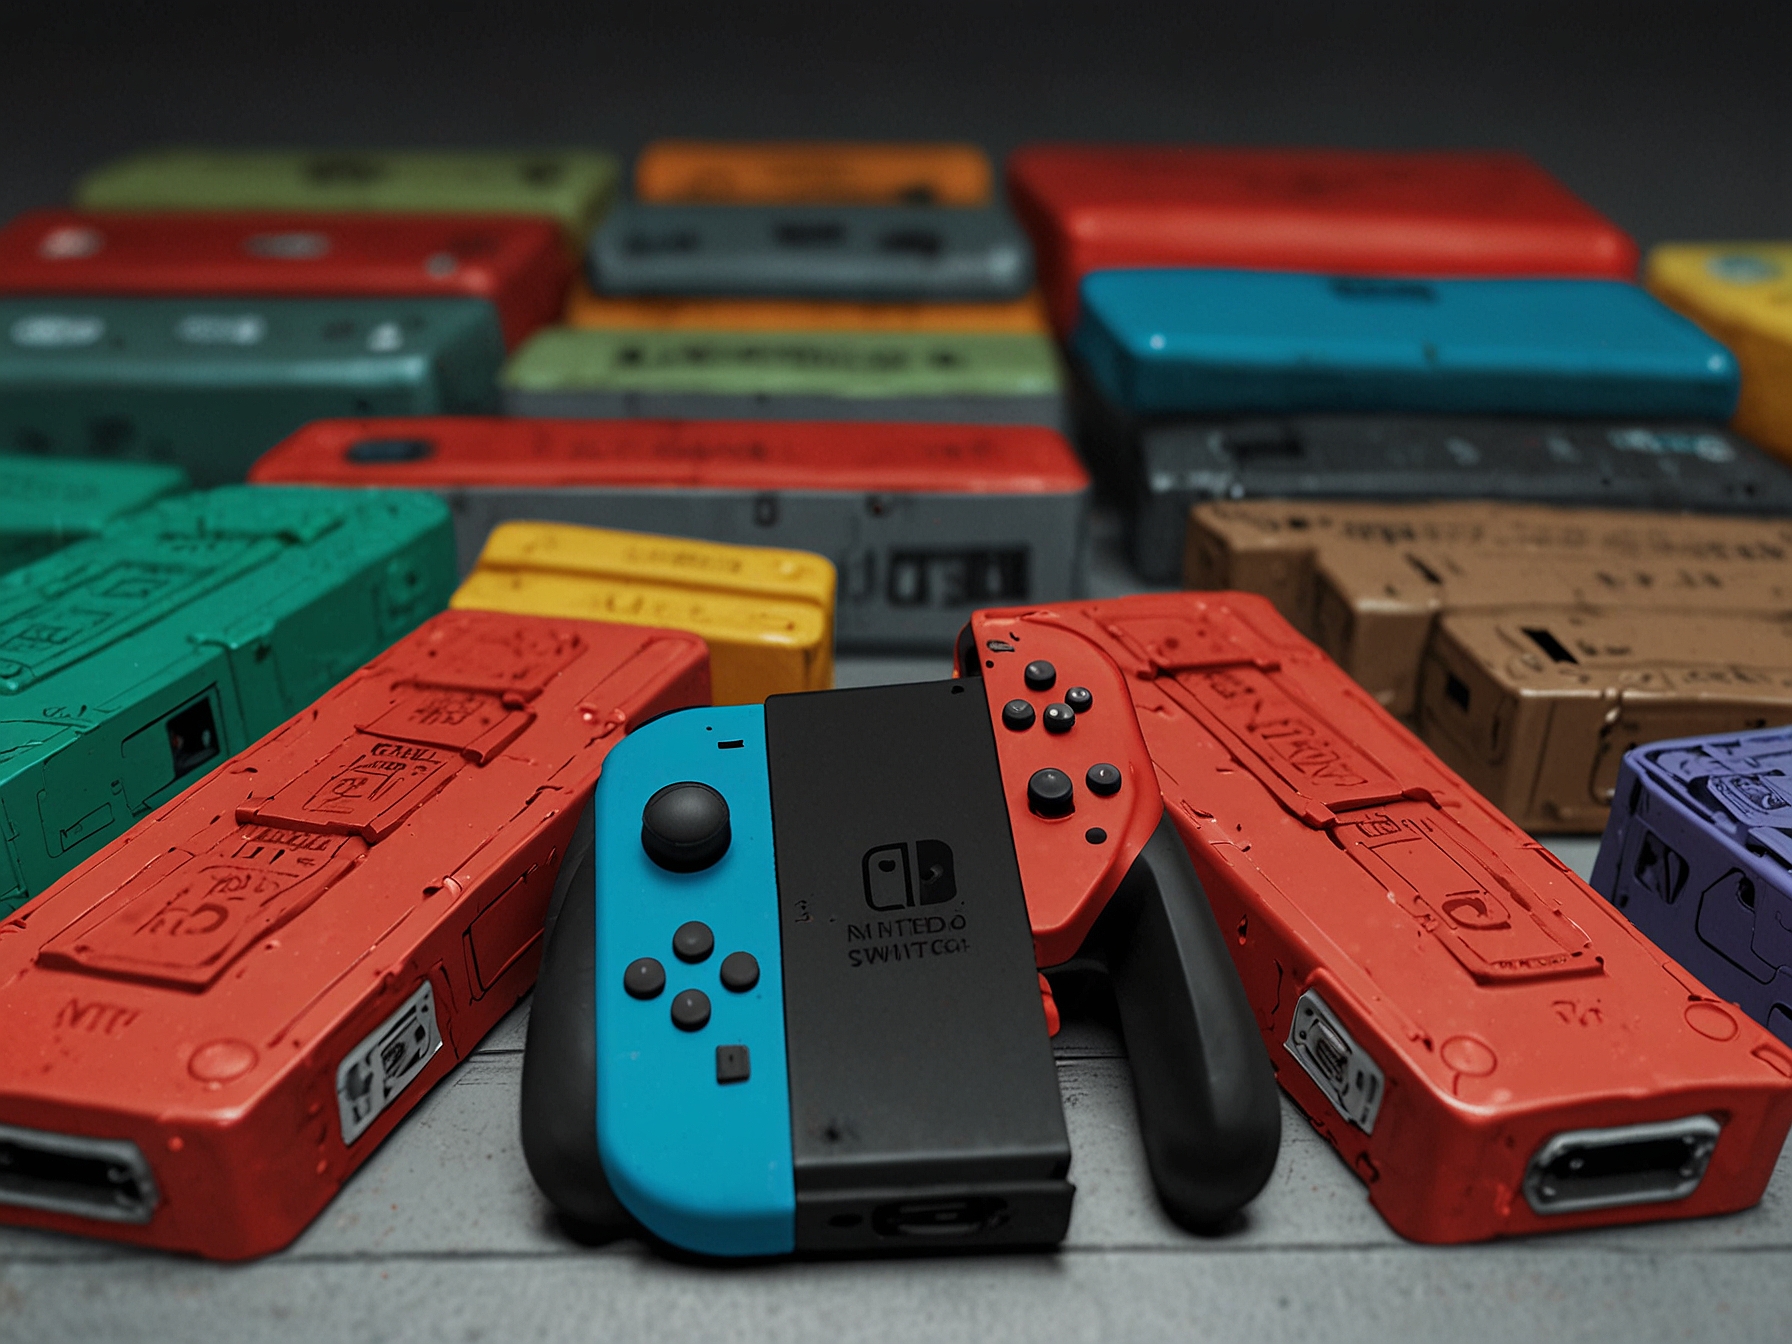 A close-up of Nintendo Switch cartridges confiscated by customs officials, highlighting the high demand and the lengths smugglers go to, reinforcing the need for stringent checks and consumer awareness.